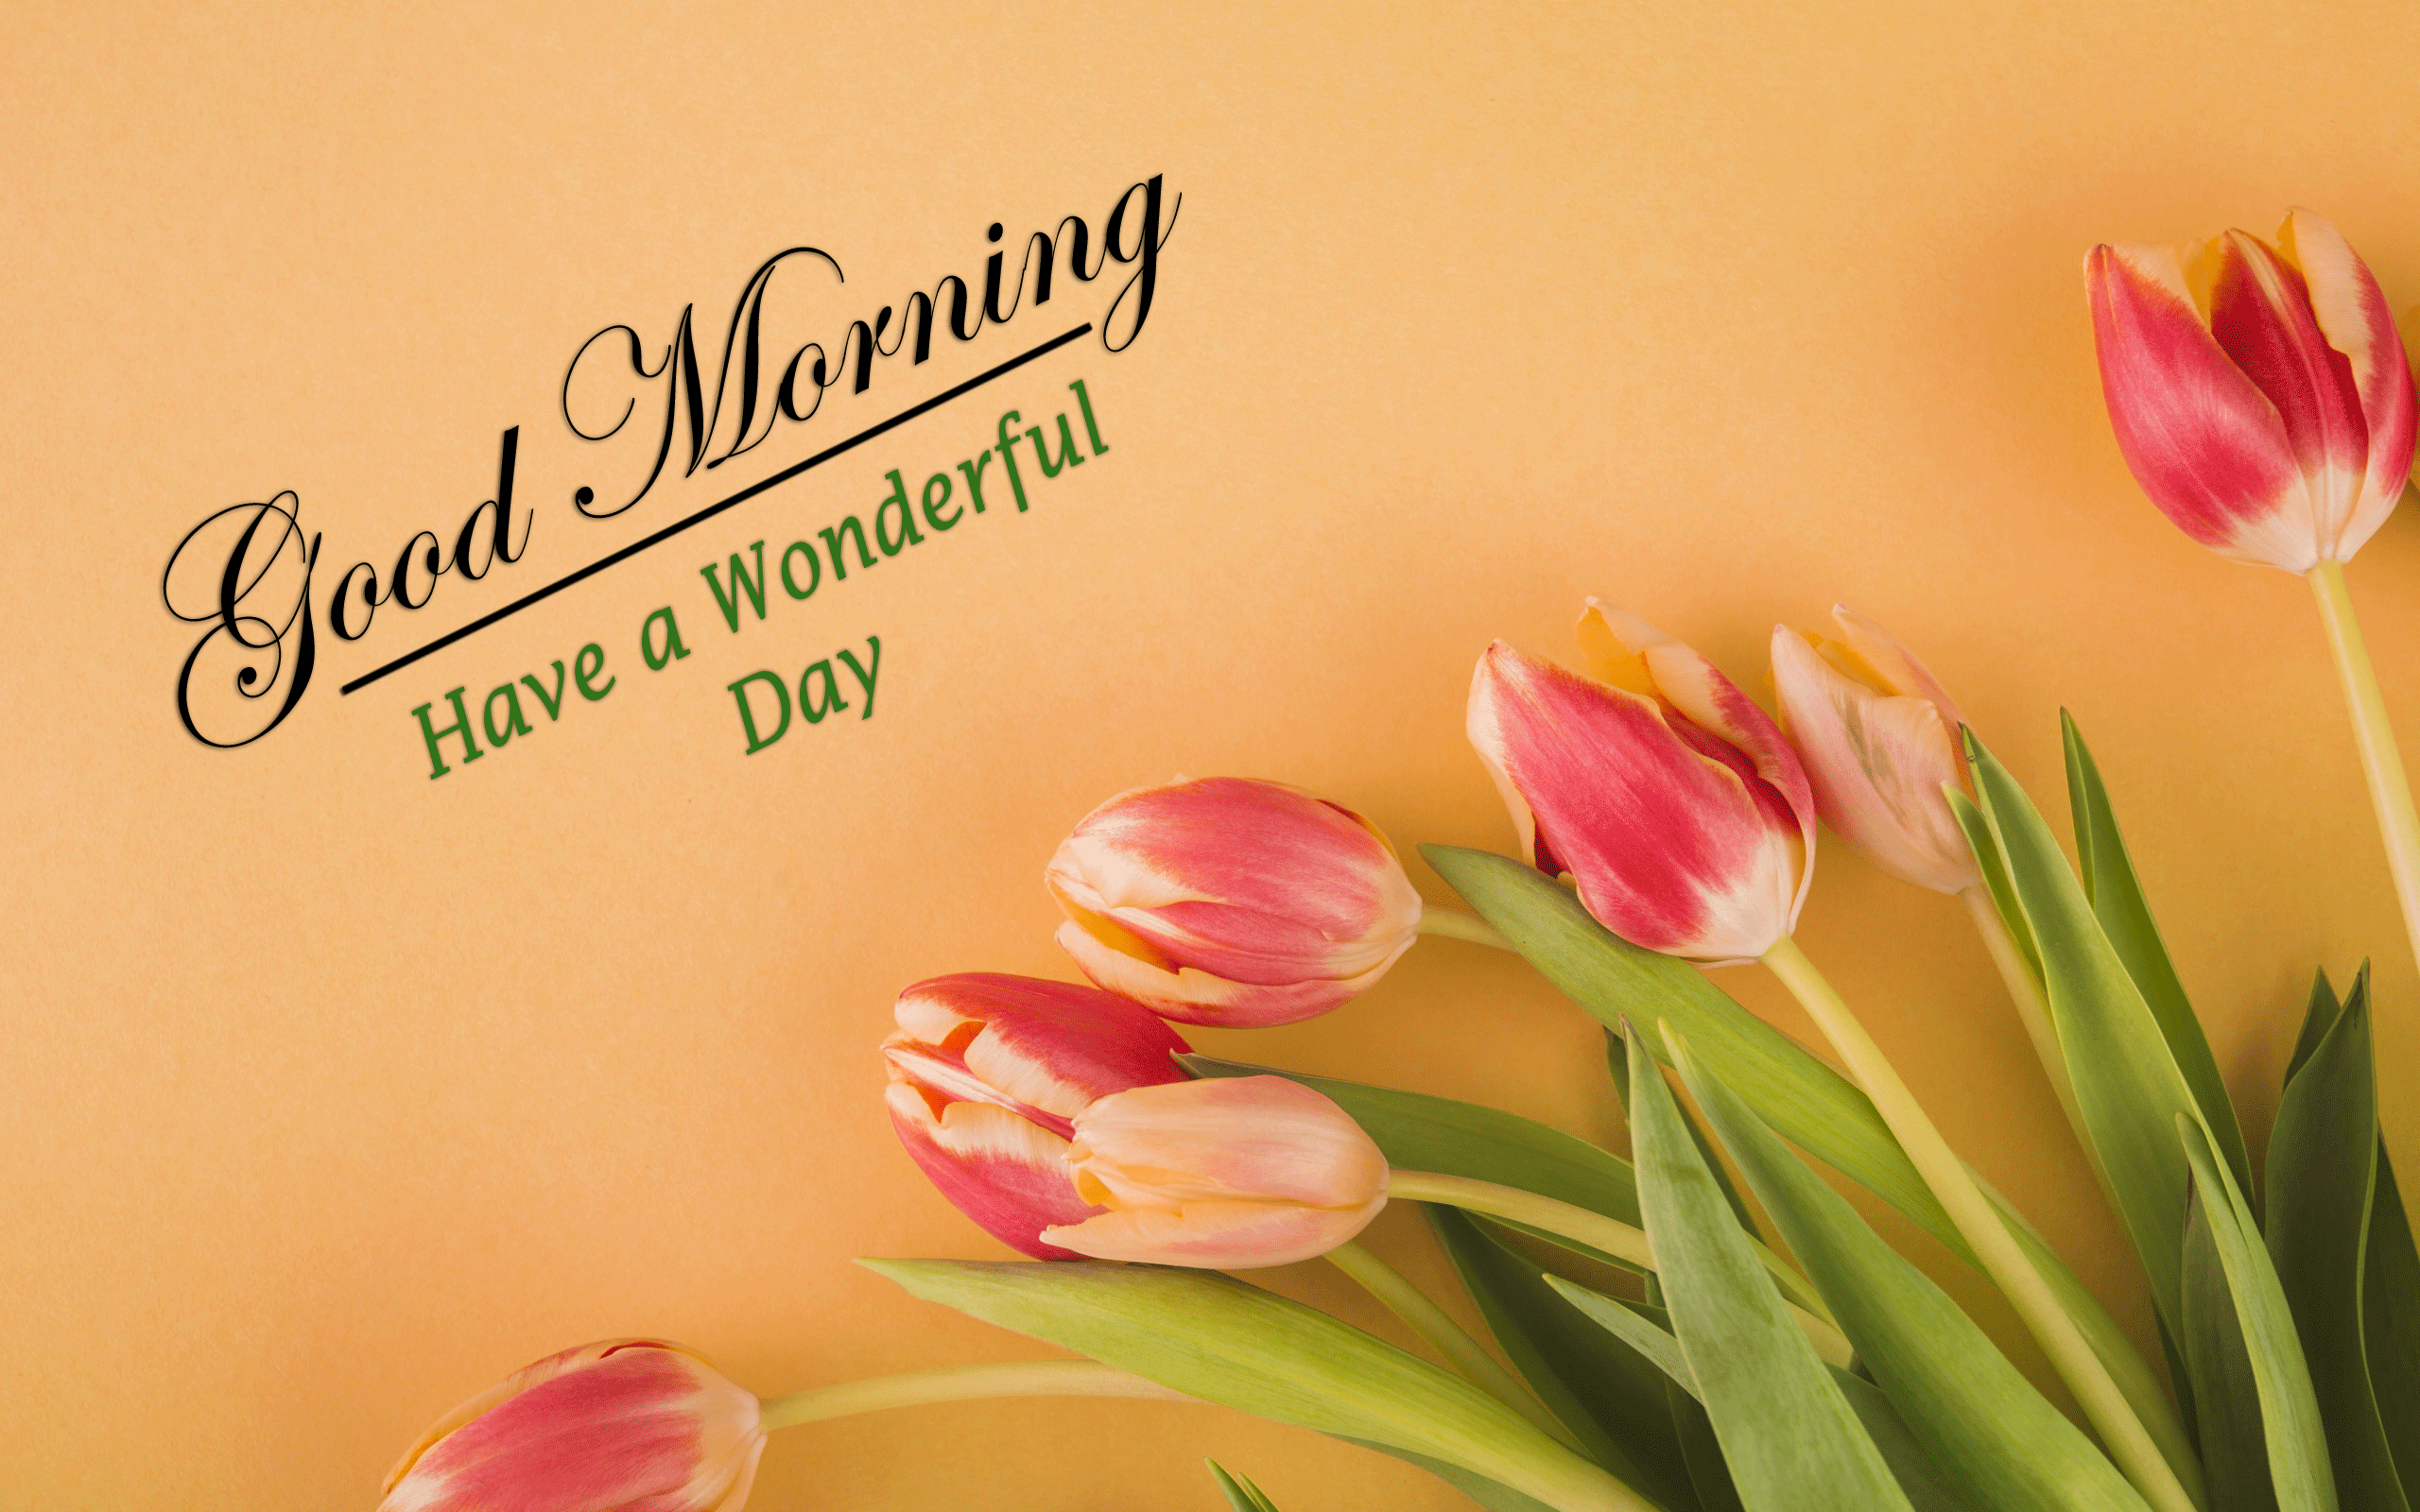 beautiful Good Morning Images photo free hd download